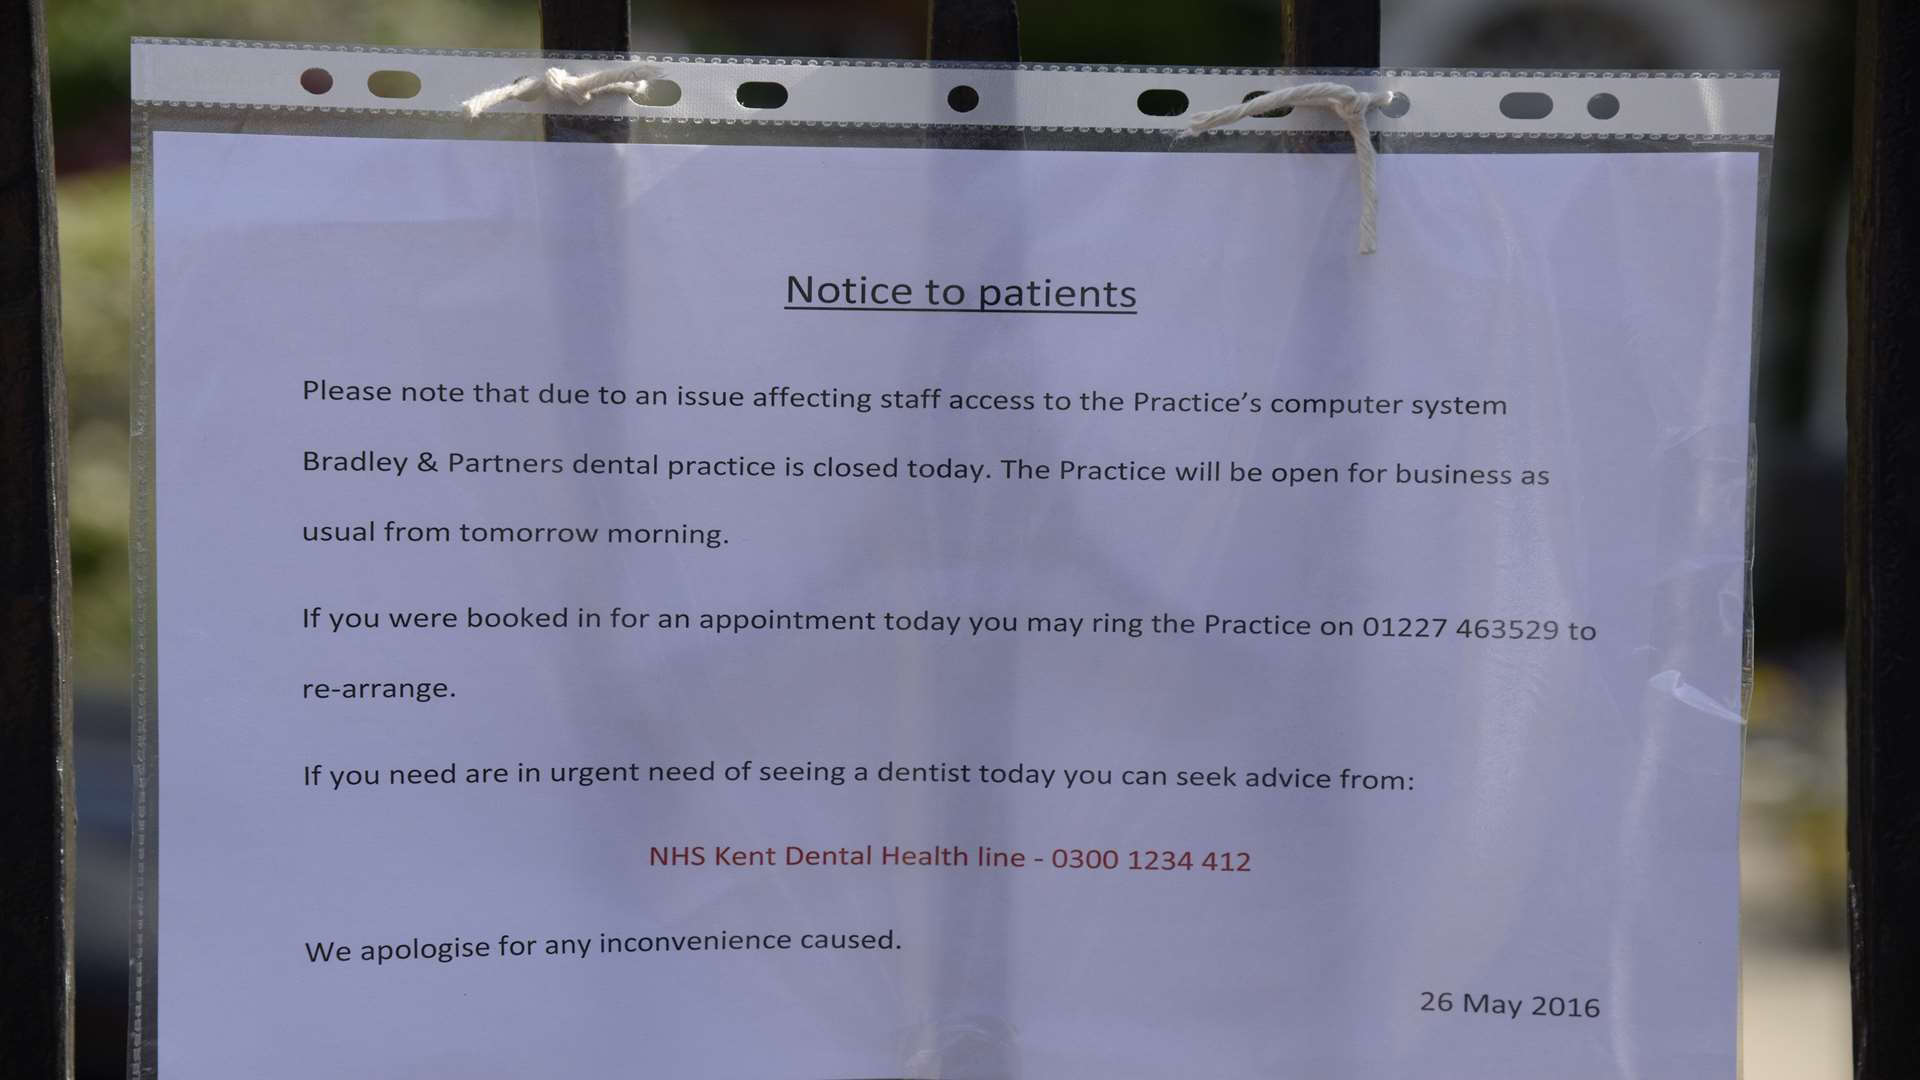 The notice to patients at the dental practice